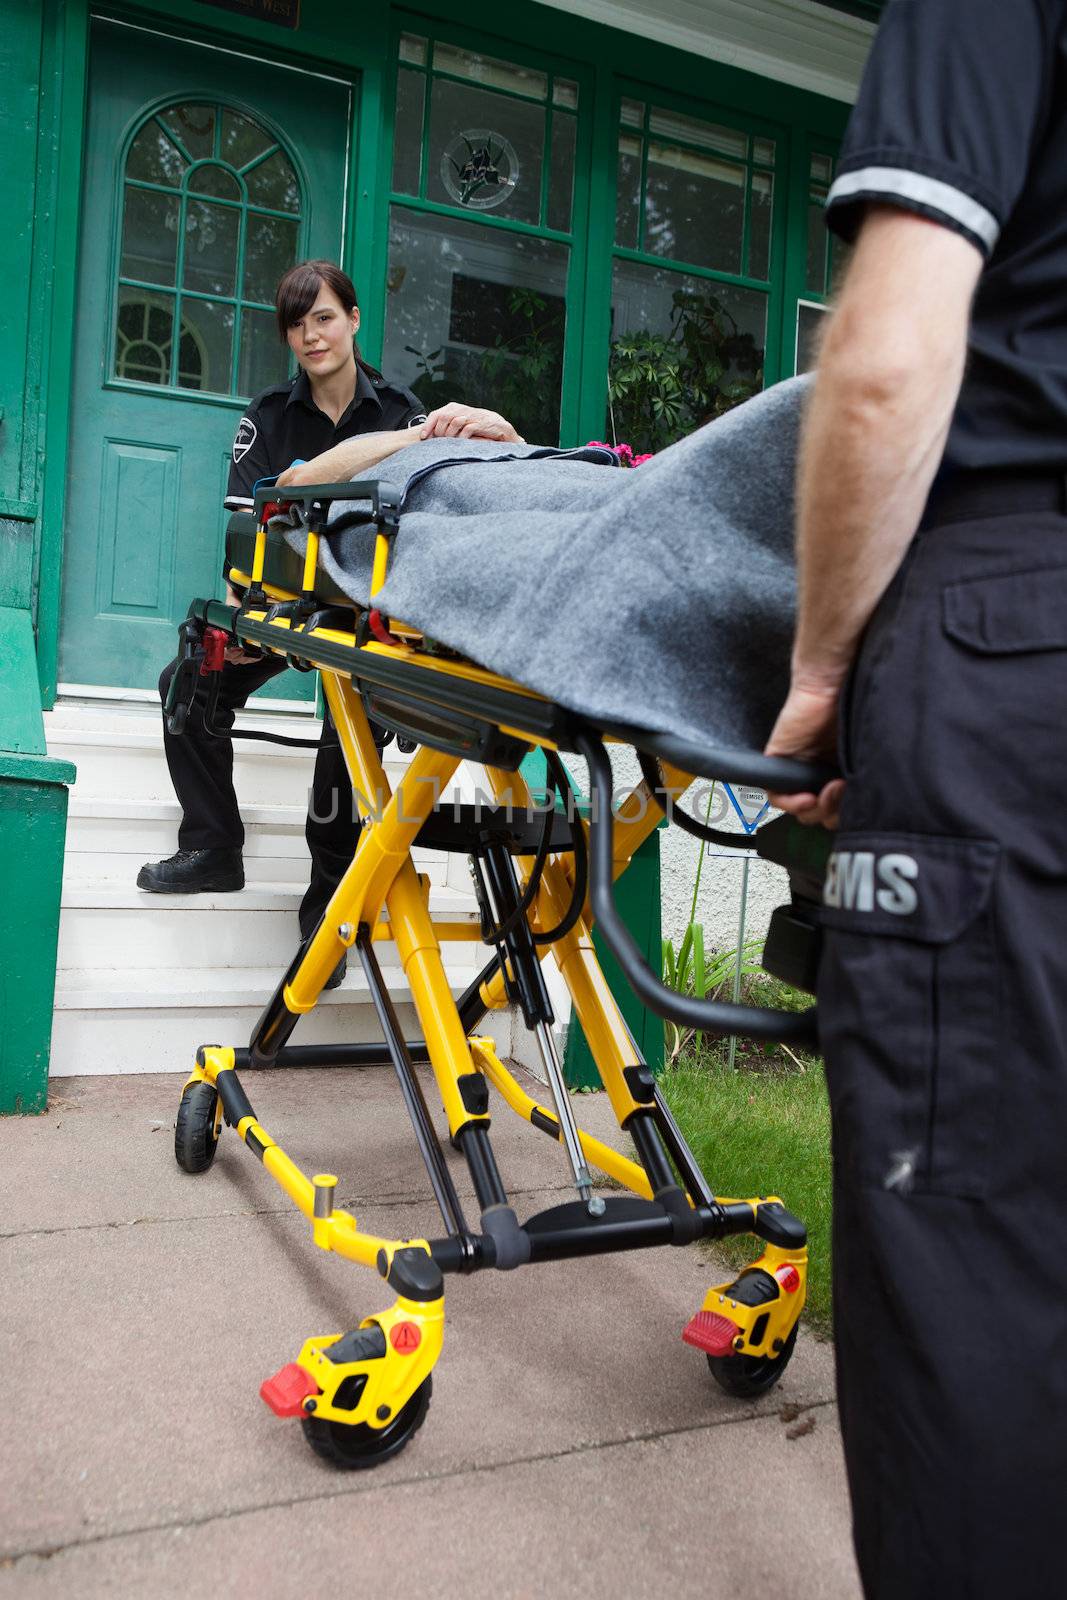 Ambulance workers with a stretcher outside a house